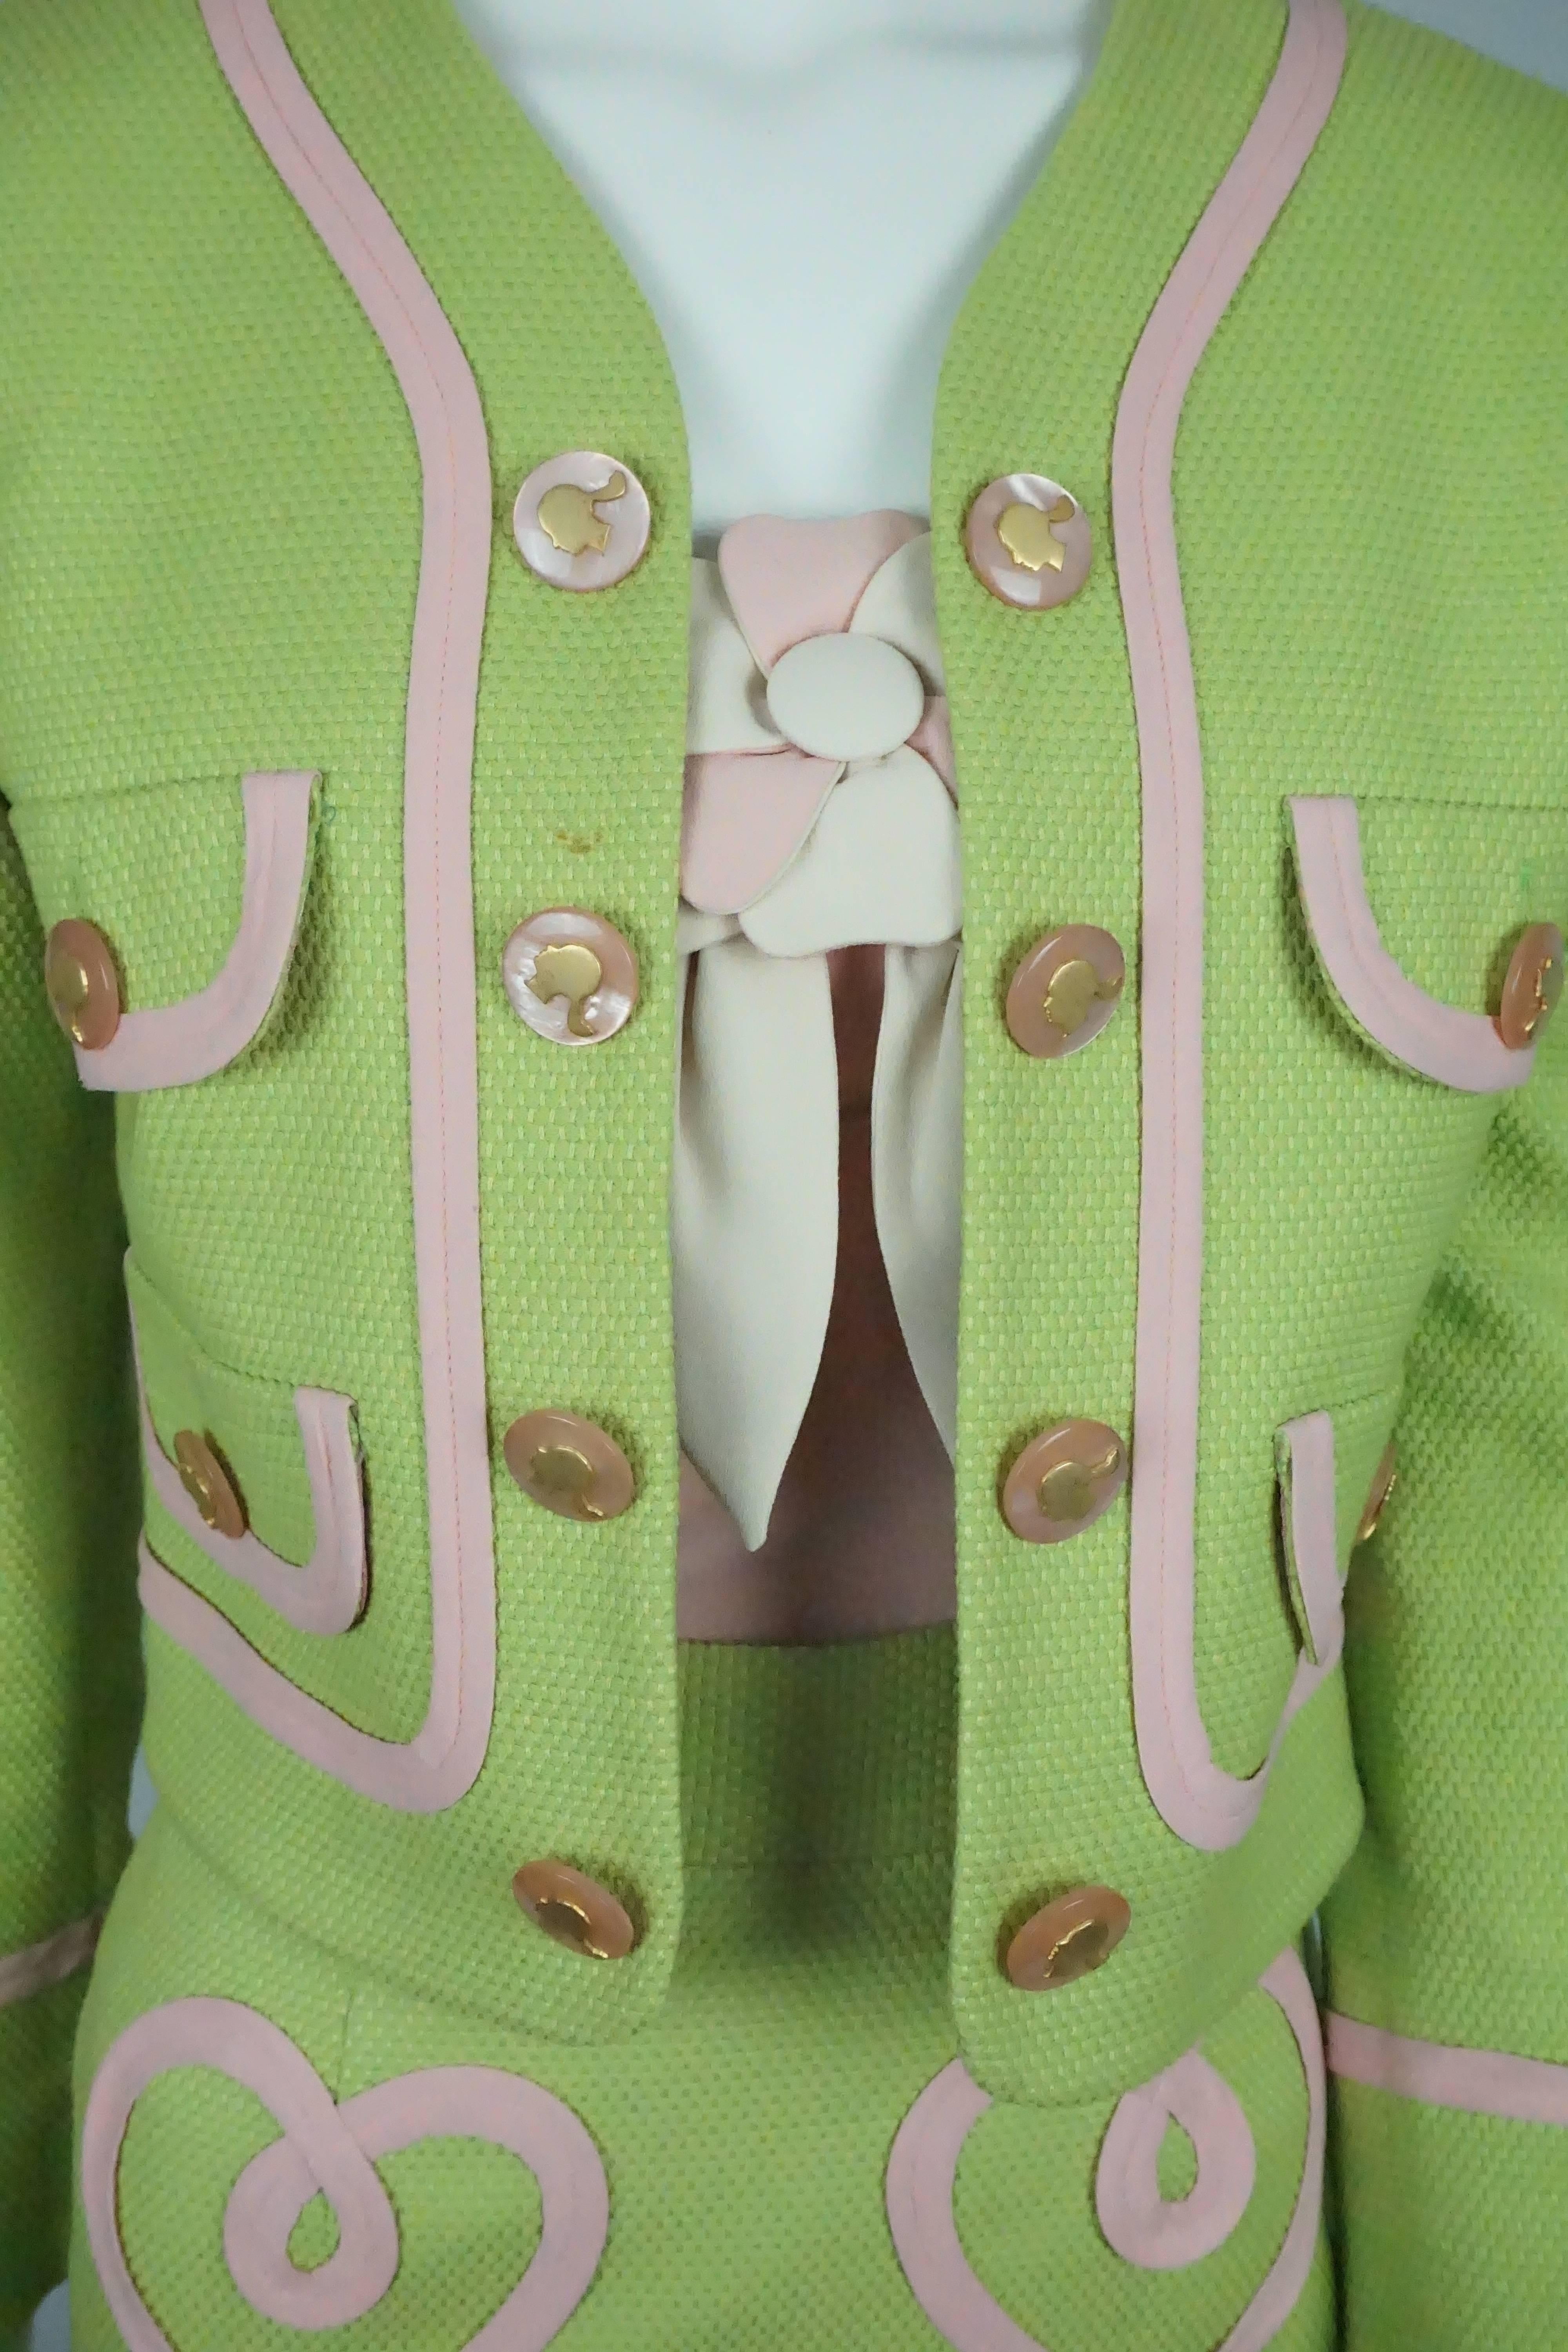 Moschino Cheap and Chic Jacket/Skirt/Top Lime Green Pique w/ Pink Silk Trim - 4 1